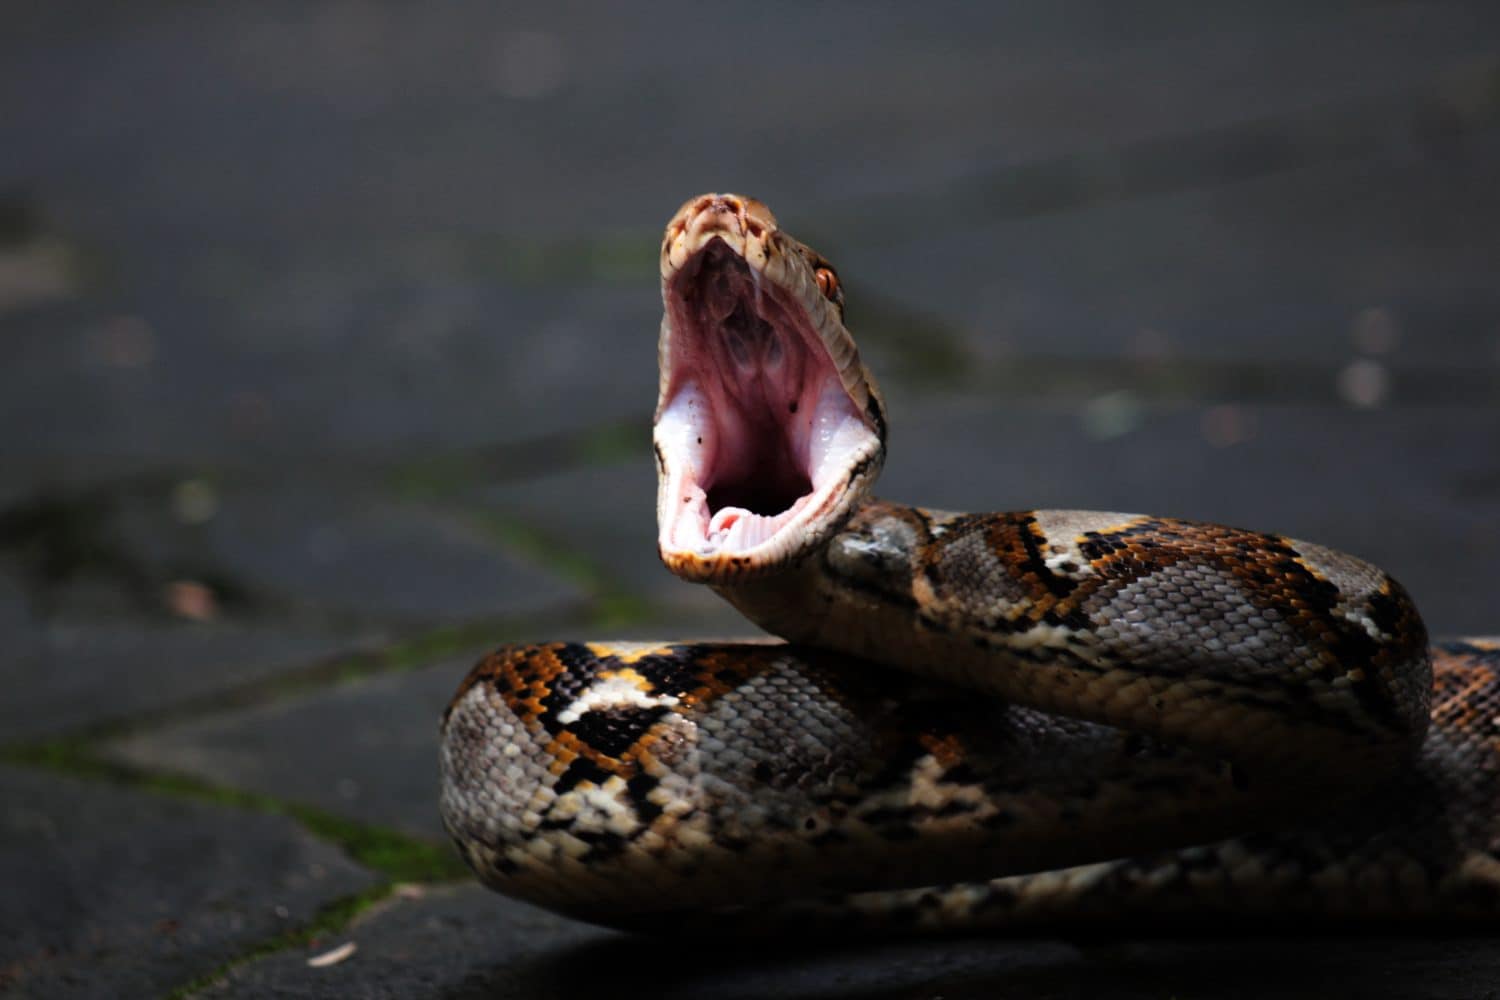 Pythons open their jaws wide ready to attack.